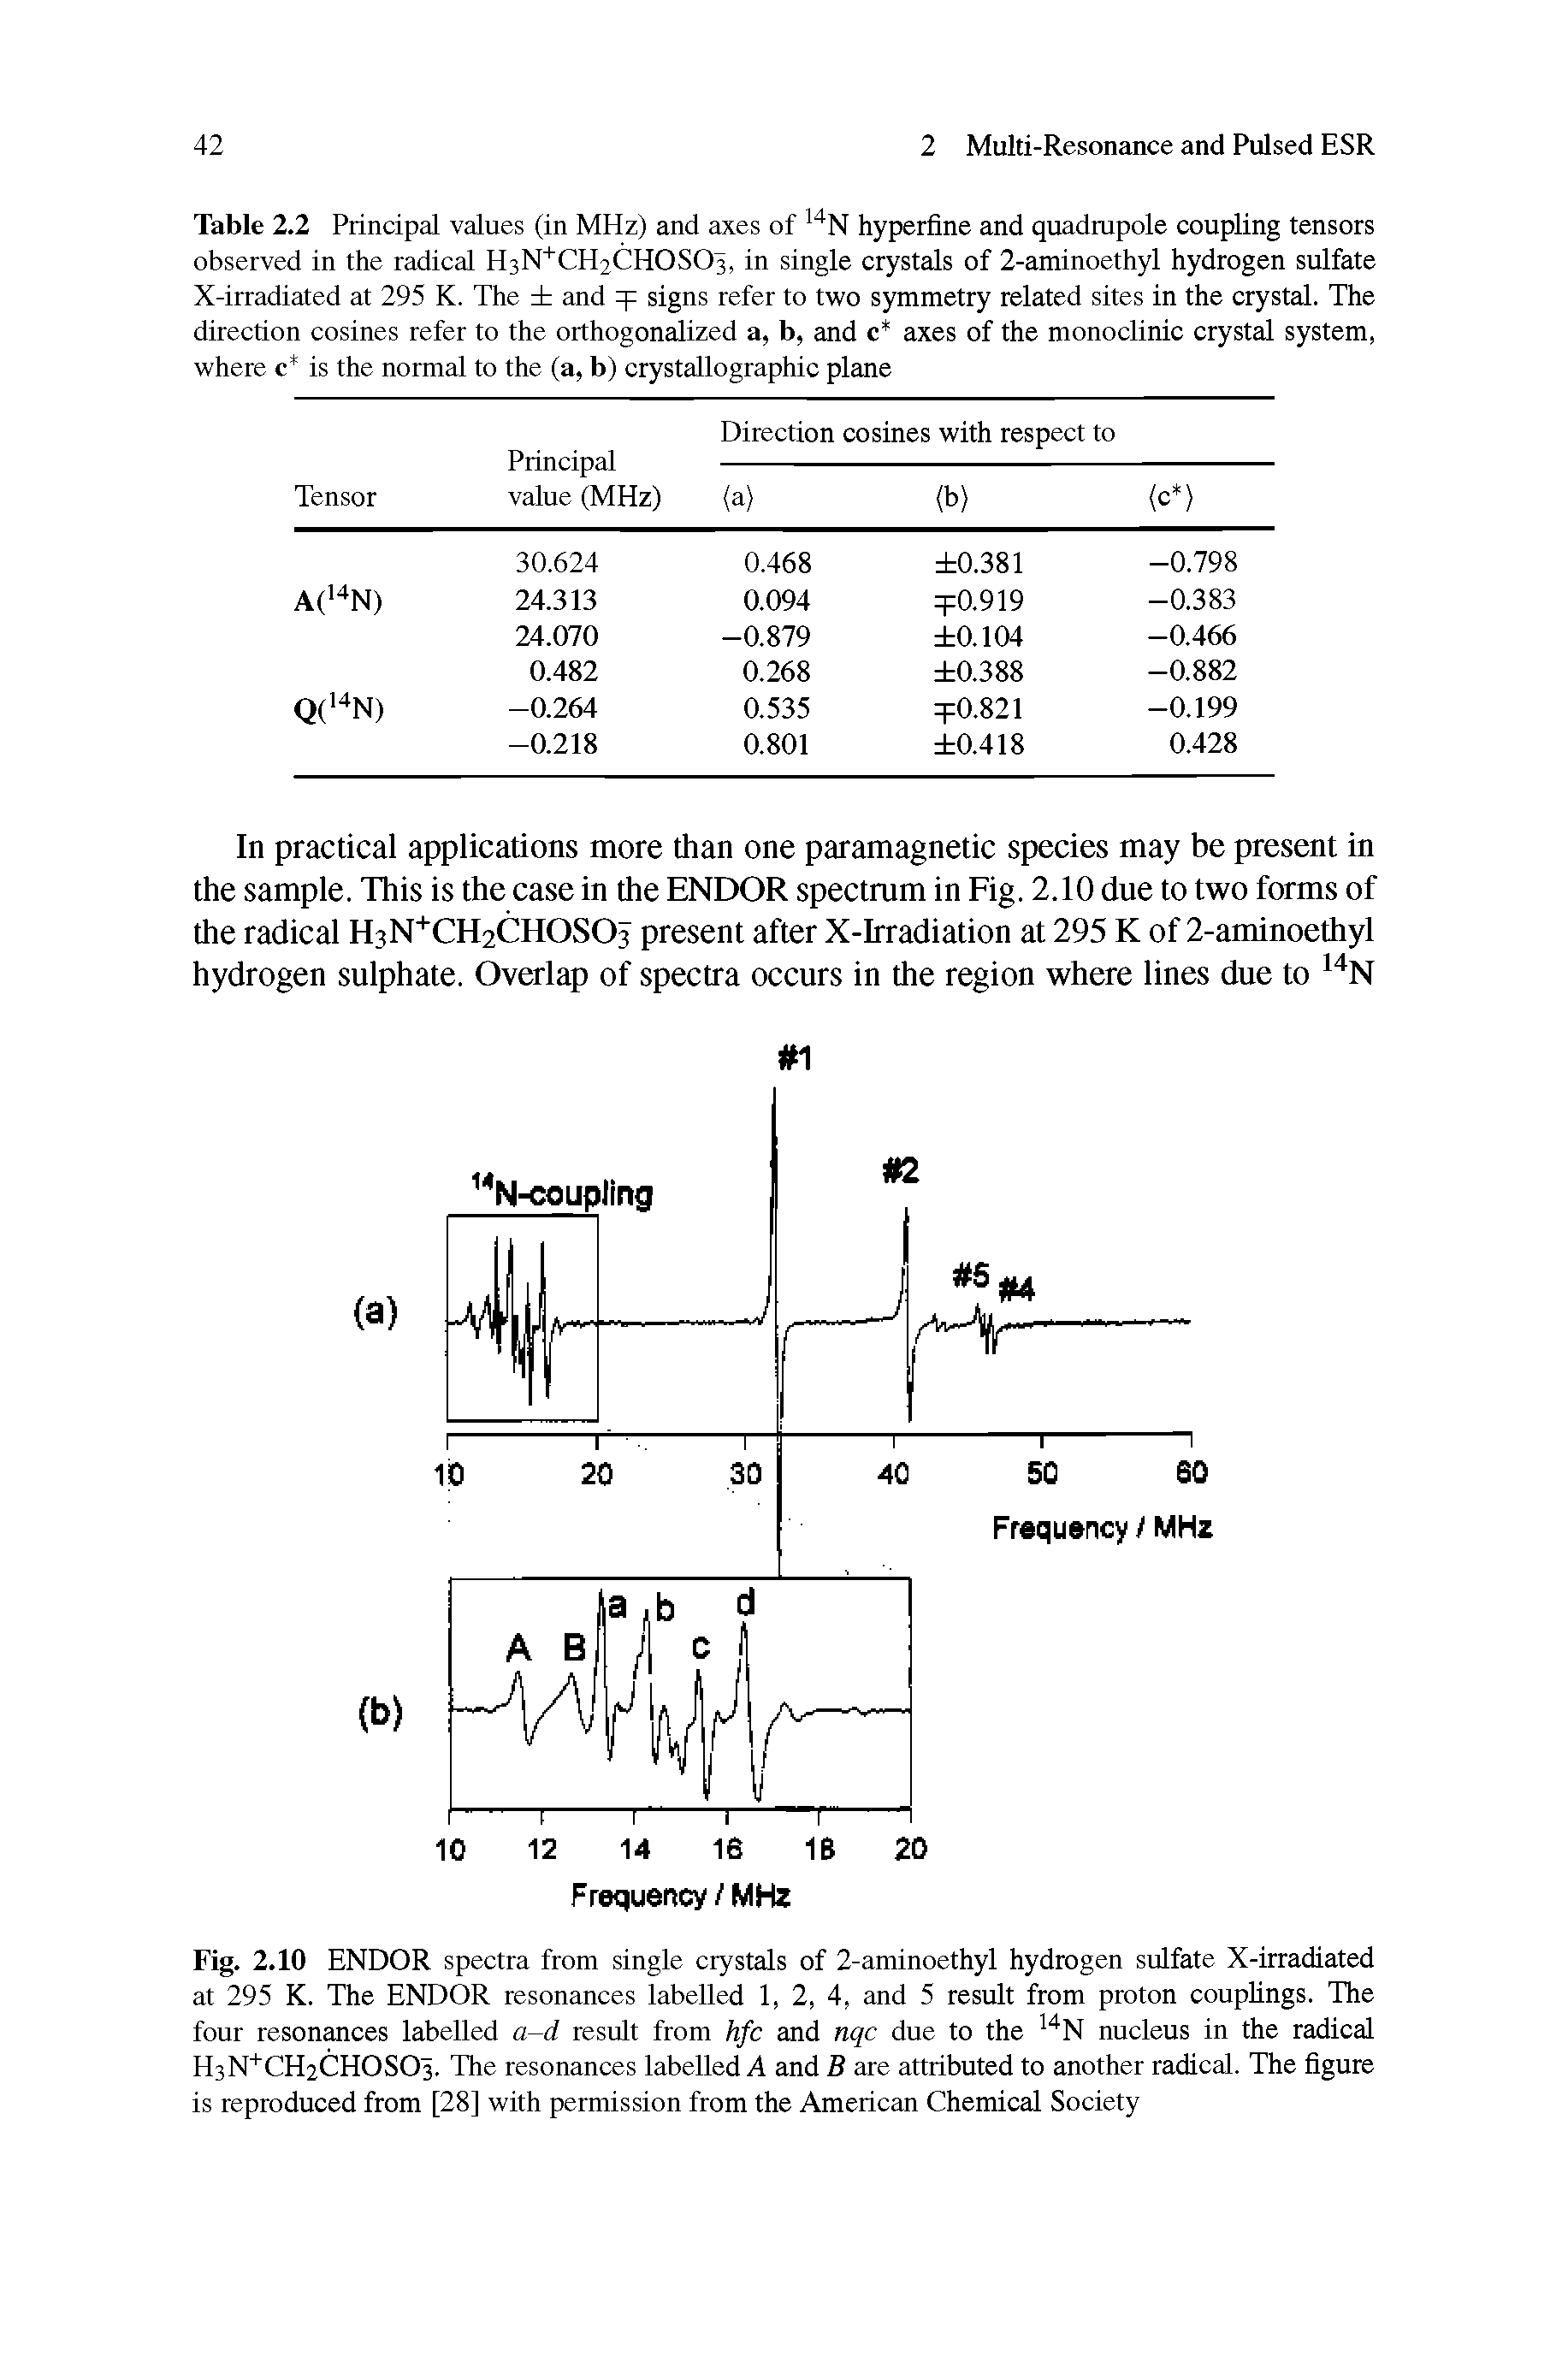 Table 2.2 Principal values (in MHz) and axes of hyperflne and quadmpole coupling tensors observed in the radical H3N CH2CH0S03, in single crystals of 2-aminoethyl hydrogen sulfate X-irradiated at 295 K. The and = = signs refer to two symmetry related sites in the crystal. The direction cosines refer to the orthogonalized a, b, and c axes of the monocUnic crystal system, where c is the normal to the (a, b) crystallographic plane...